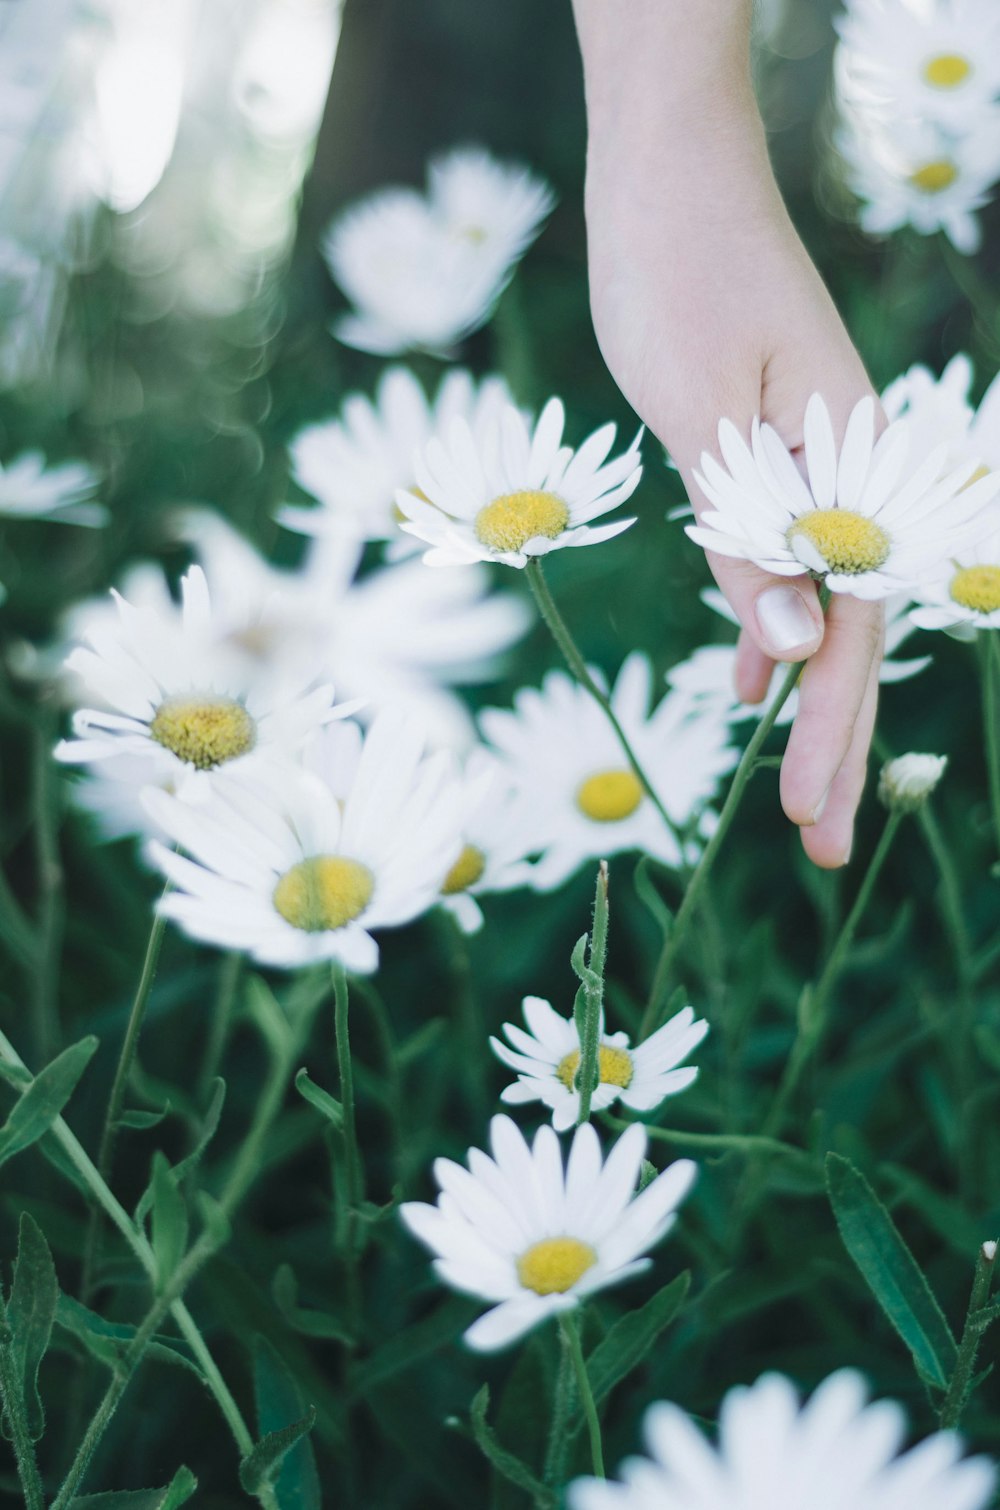 person holding daisy flowers